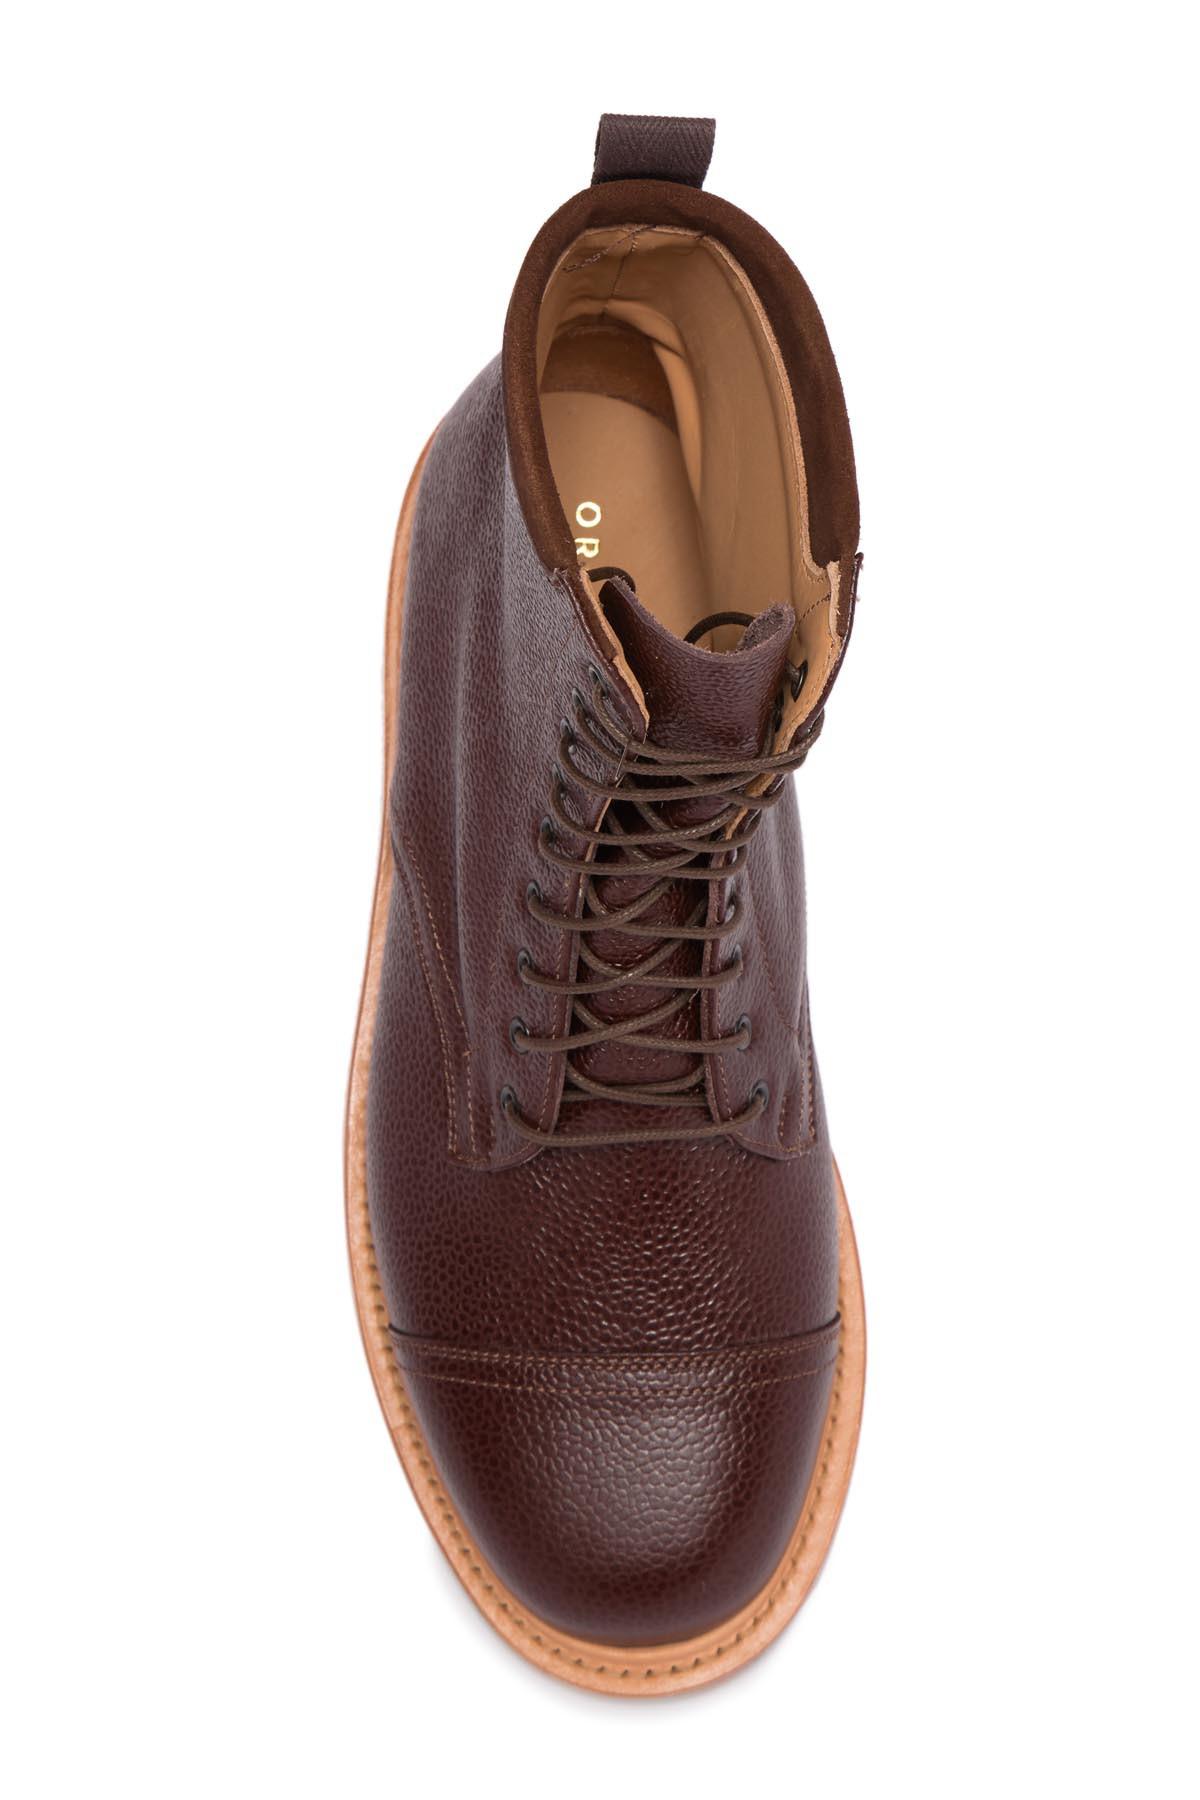 Clarks Leather Craftmaster I - Made In The Uk in Burgundy (Brown) for Men |  Lyst